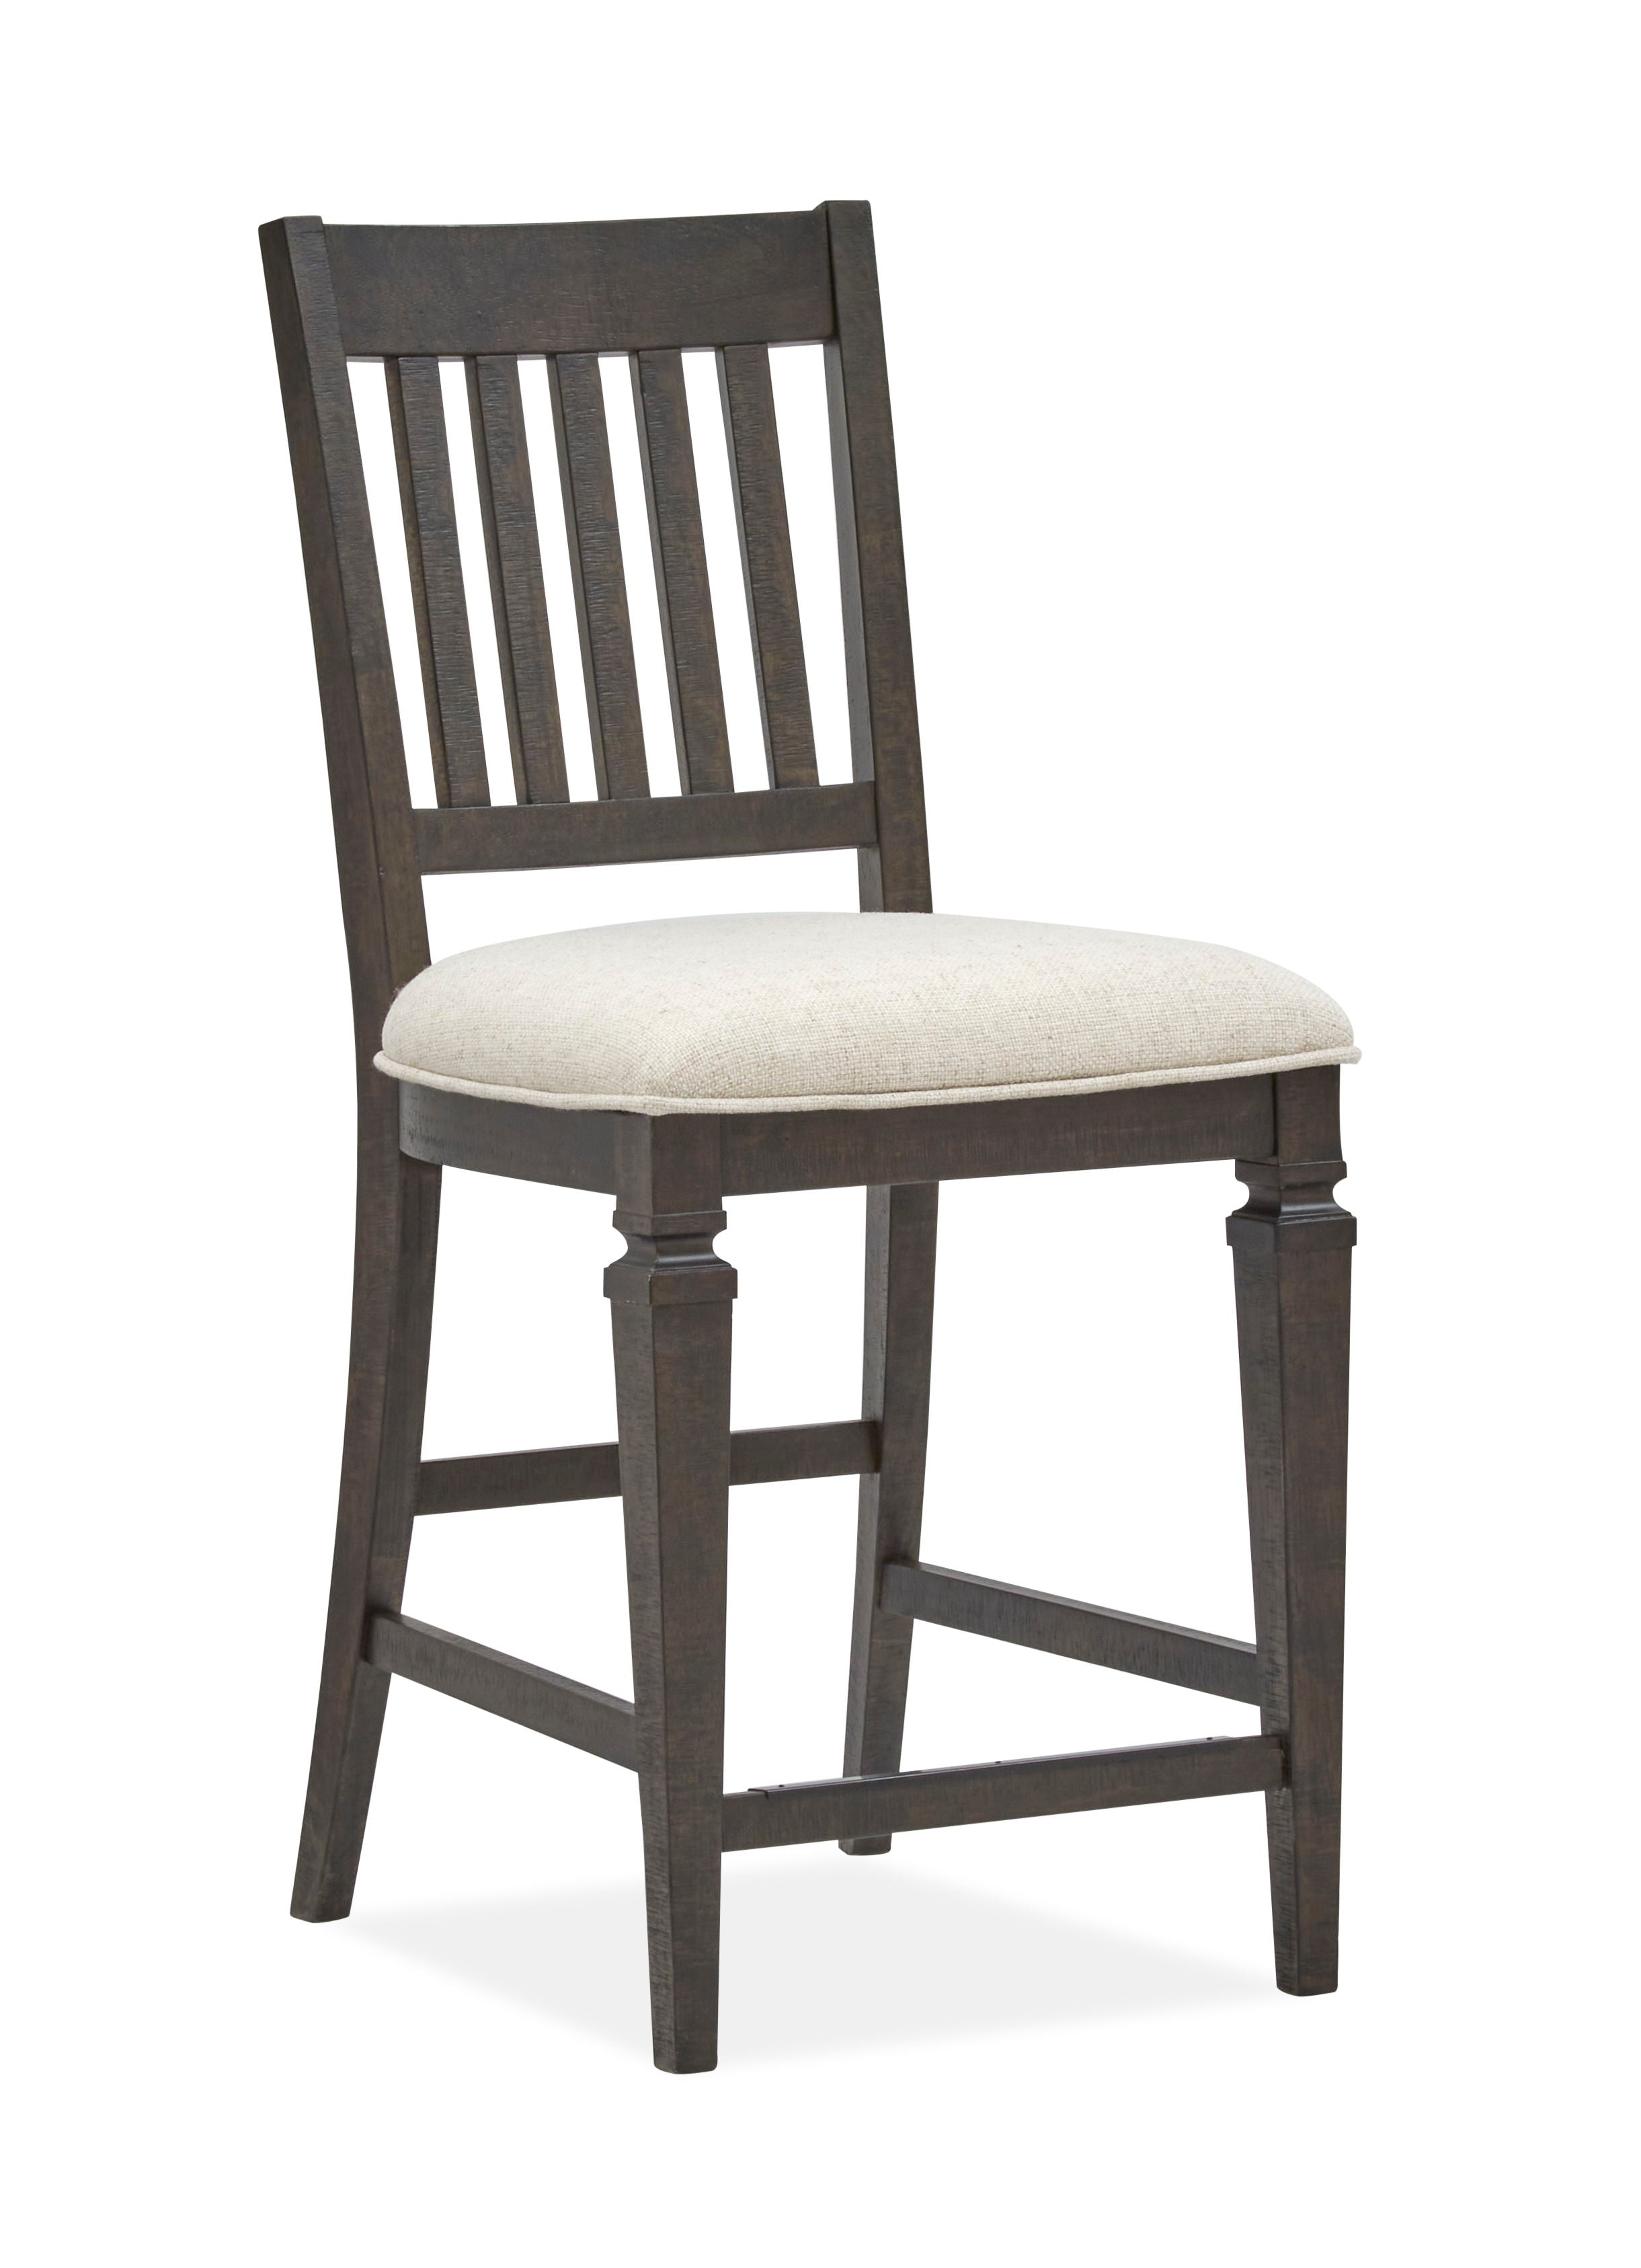 Calistoga - Counter Dining Chair With Upholstered Seat (Set of 2) - Weathered Charcoal